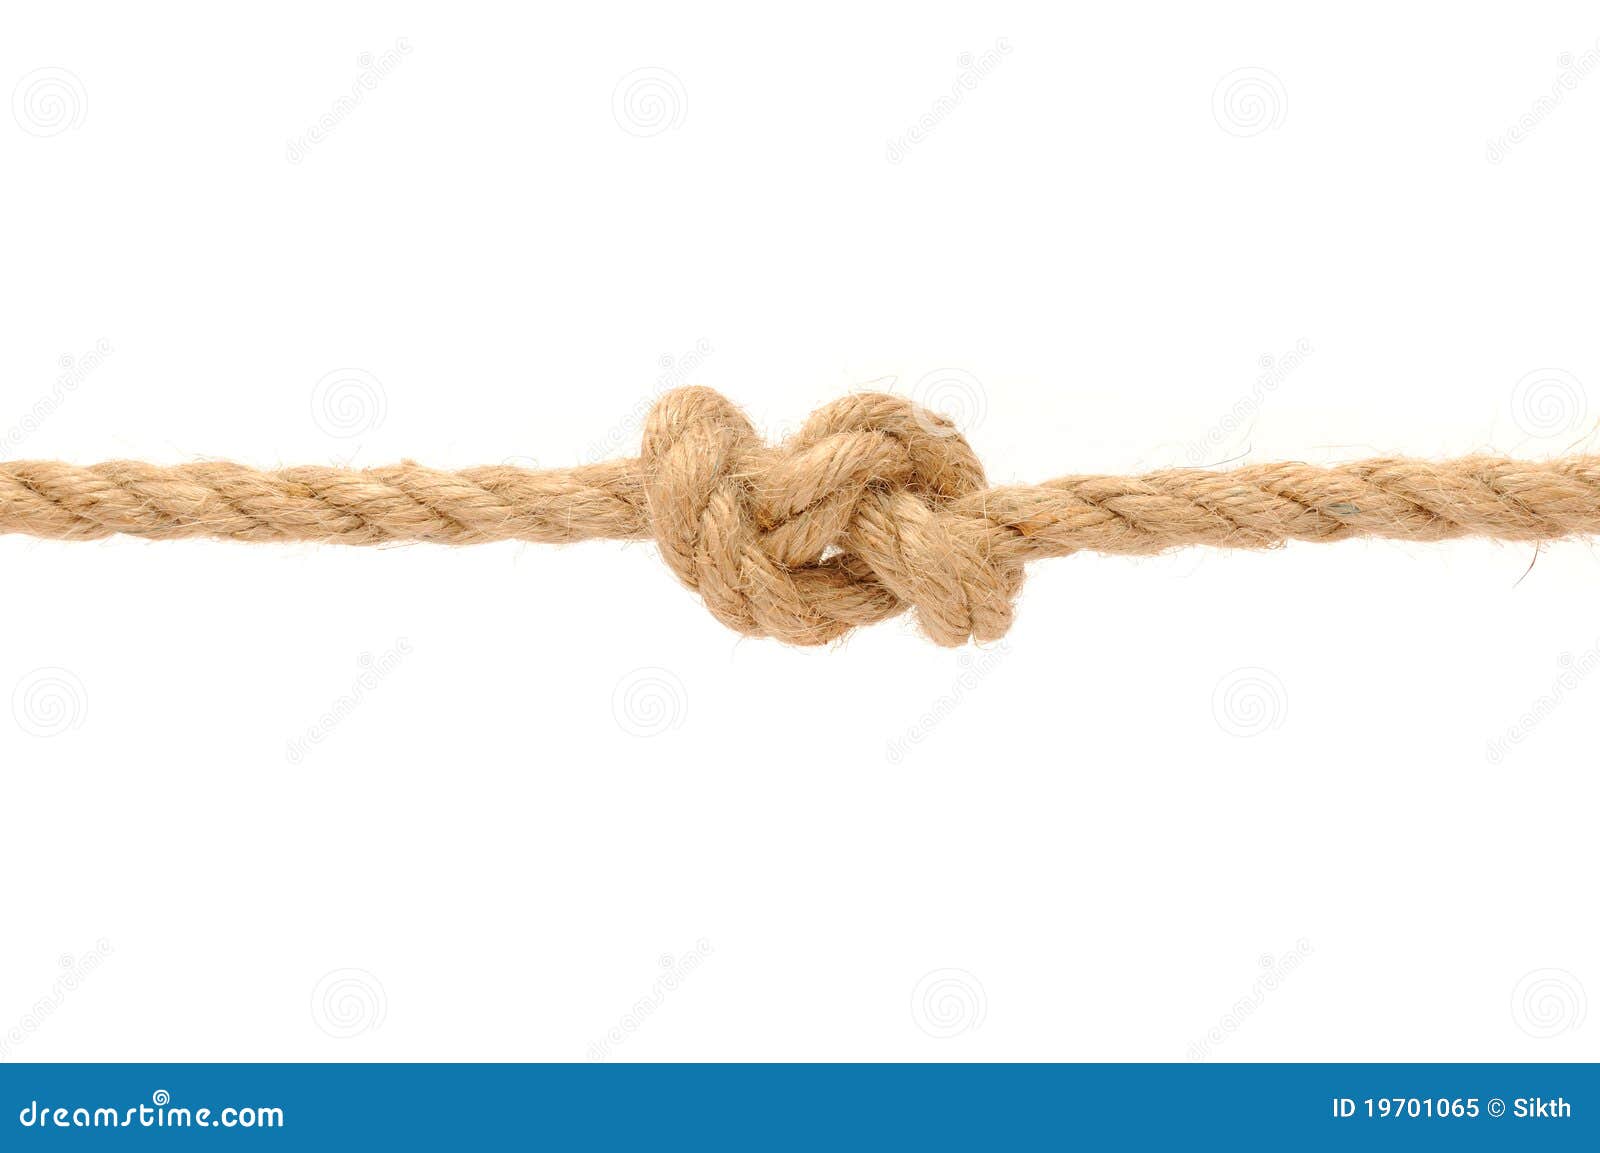 Rope noose with knot on white background, top view - Stock Image